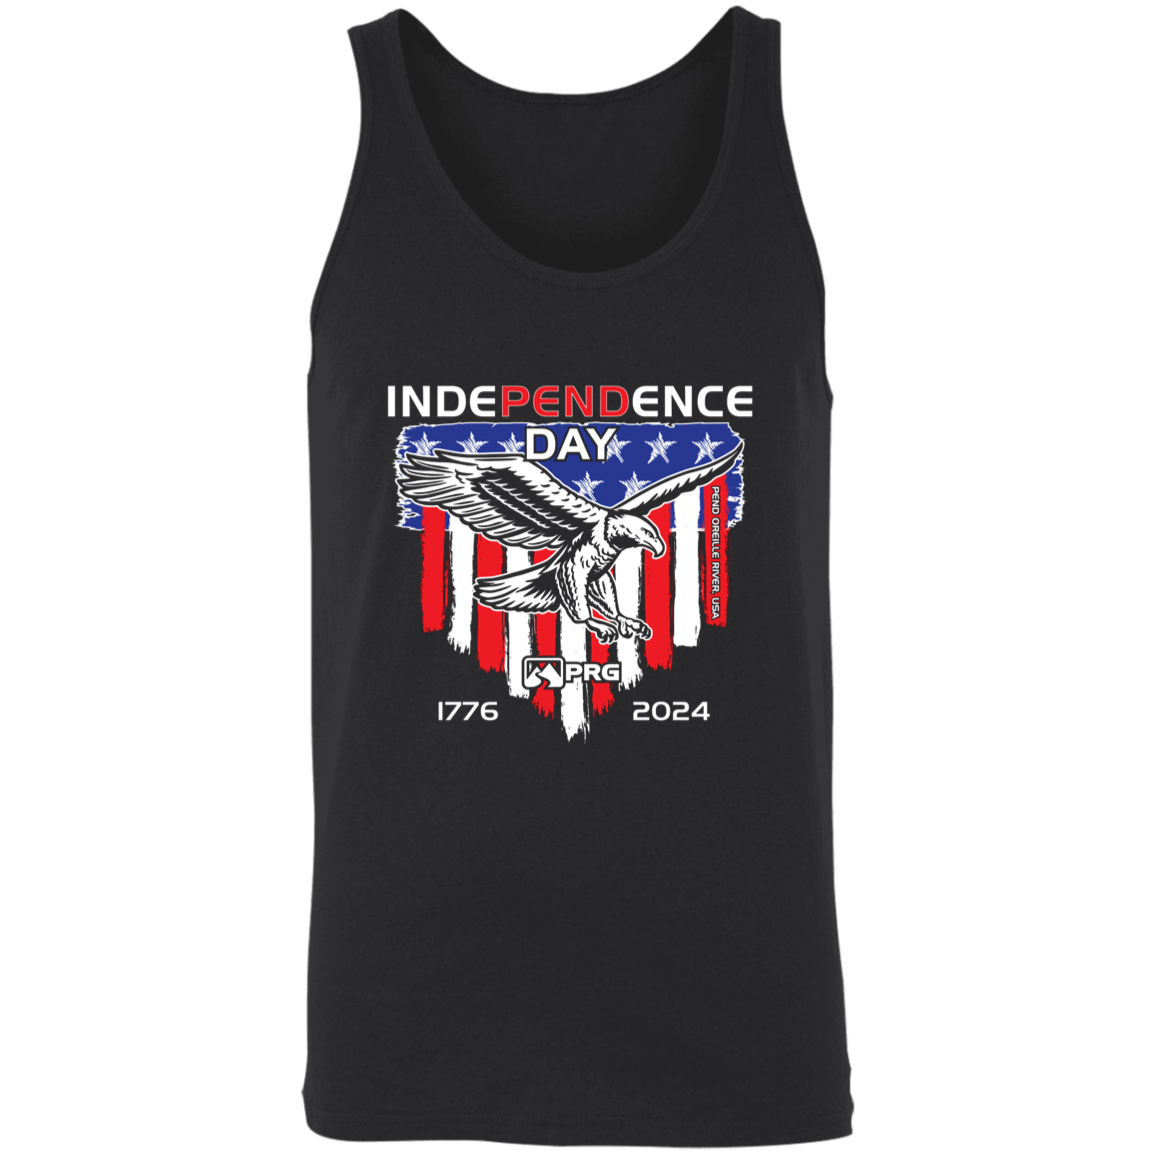 2024 Independence Day - Tank